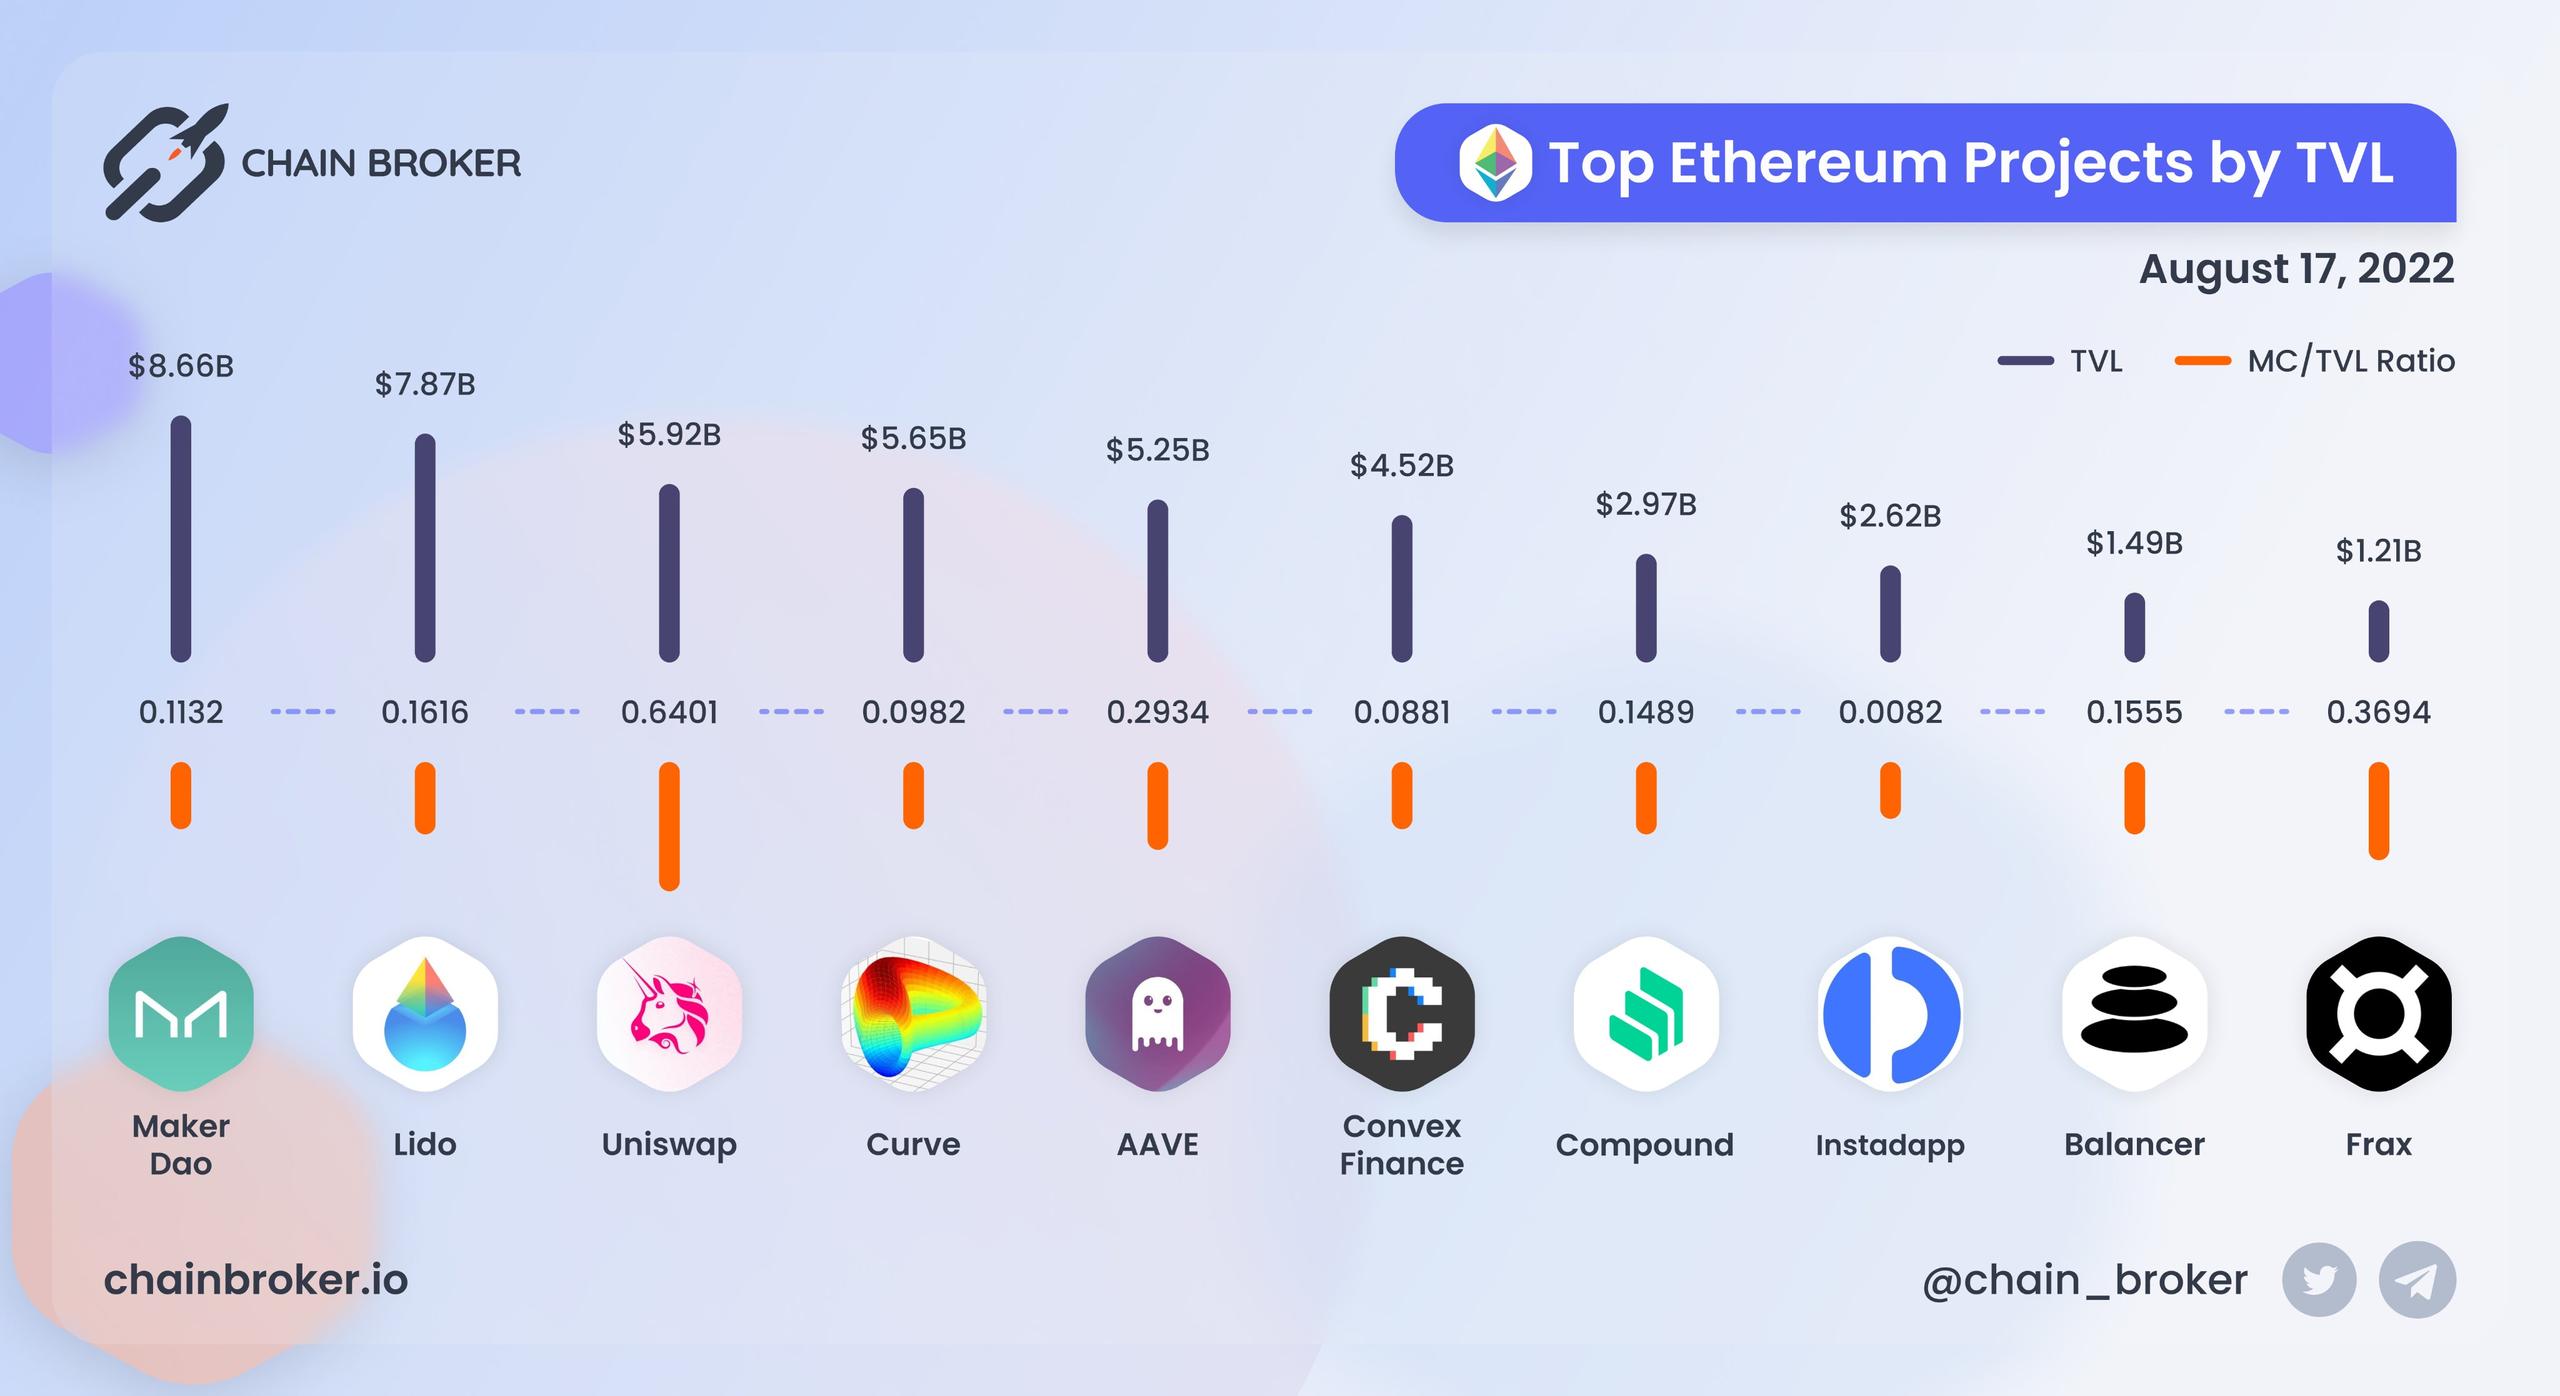 Top Ethereum projcts ranged by TVL